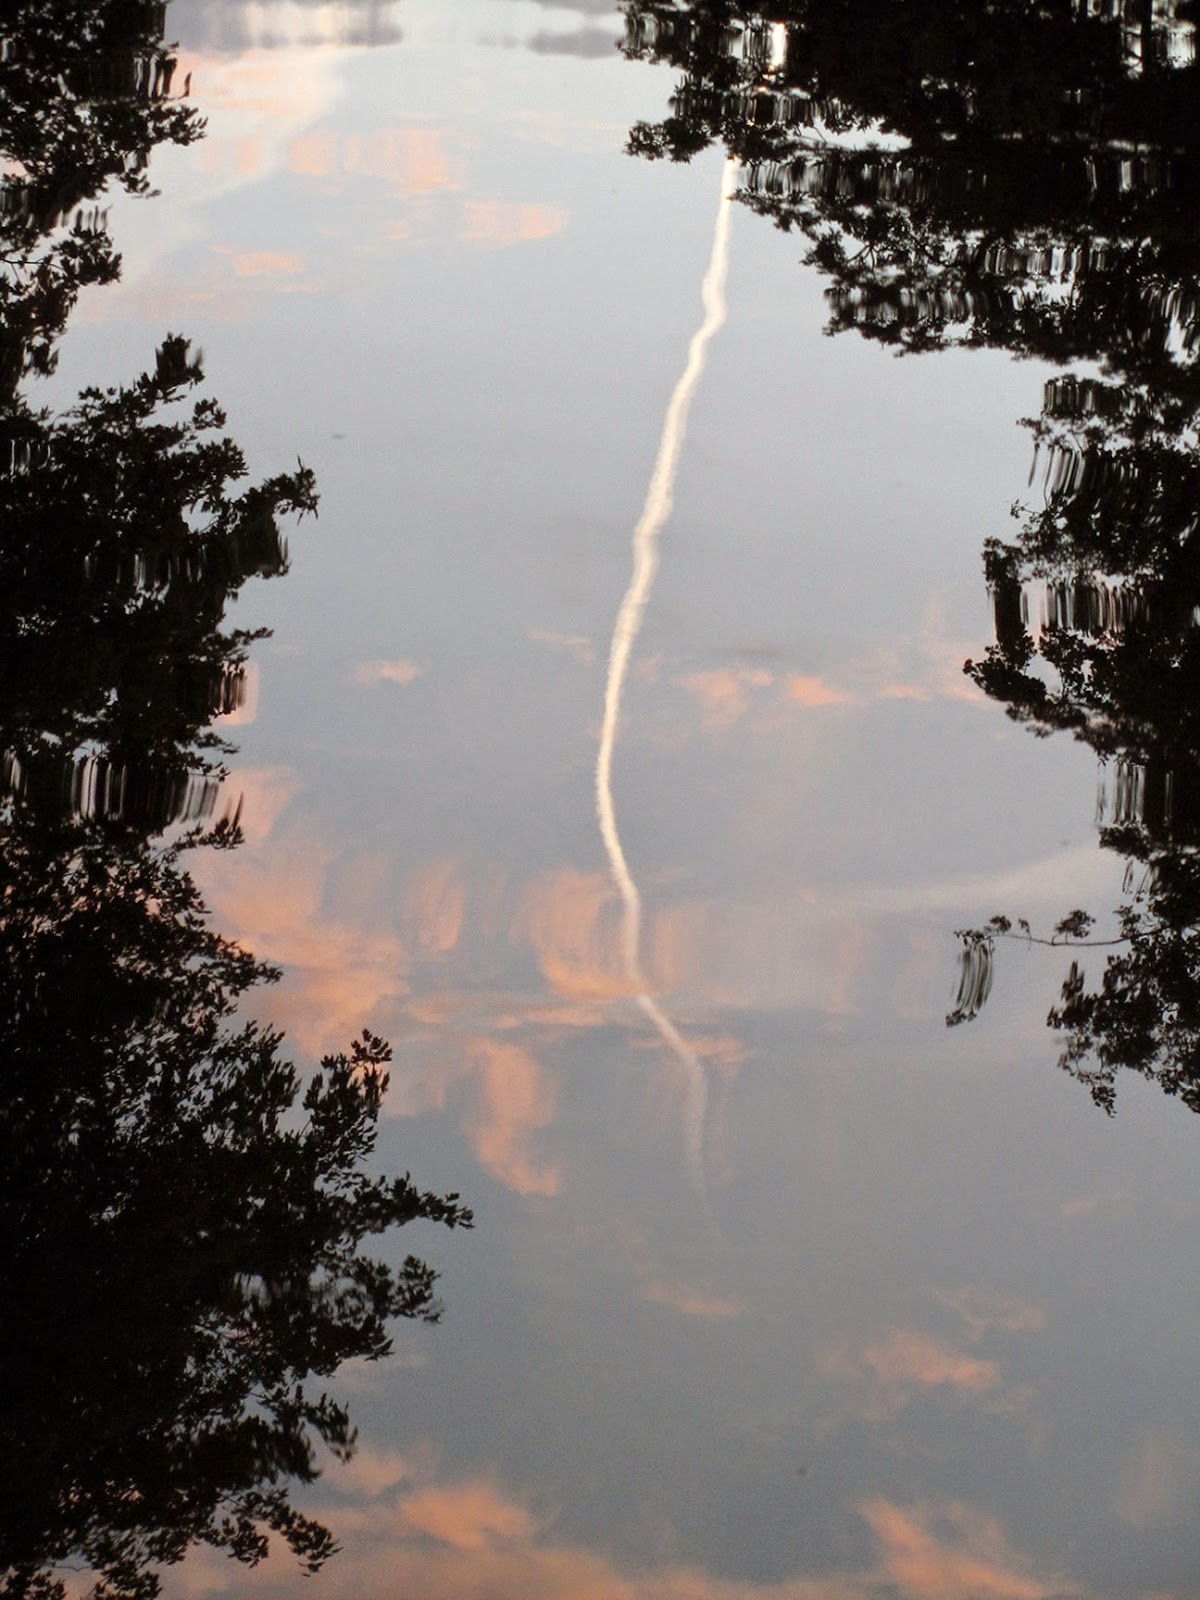 reflection of chemtrail in water